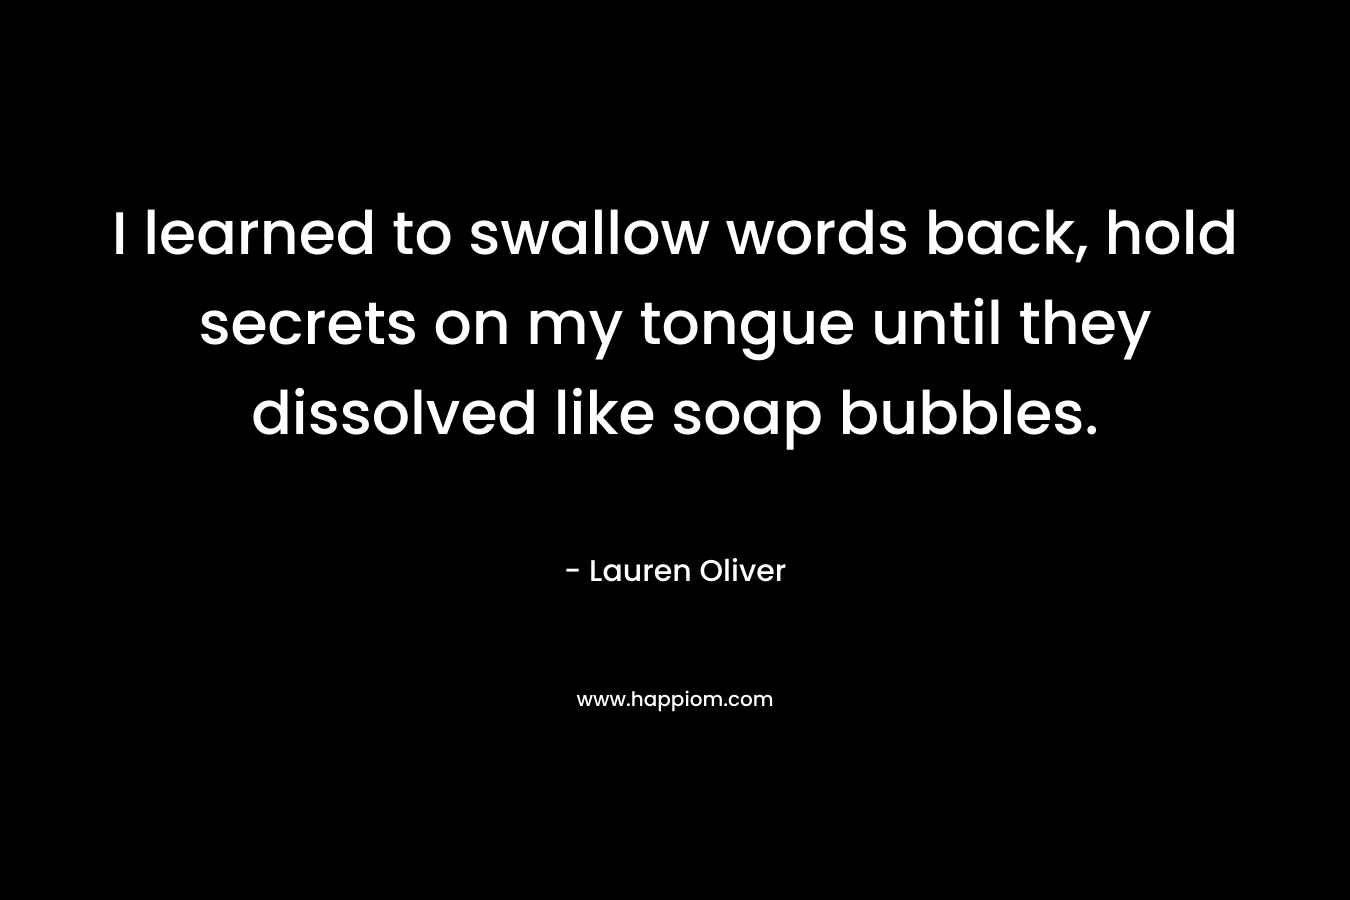 I learned to swallow words back, hold secrets on my tongue until they dissolved like soap bubbles.